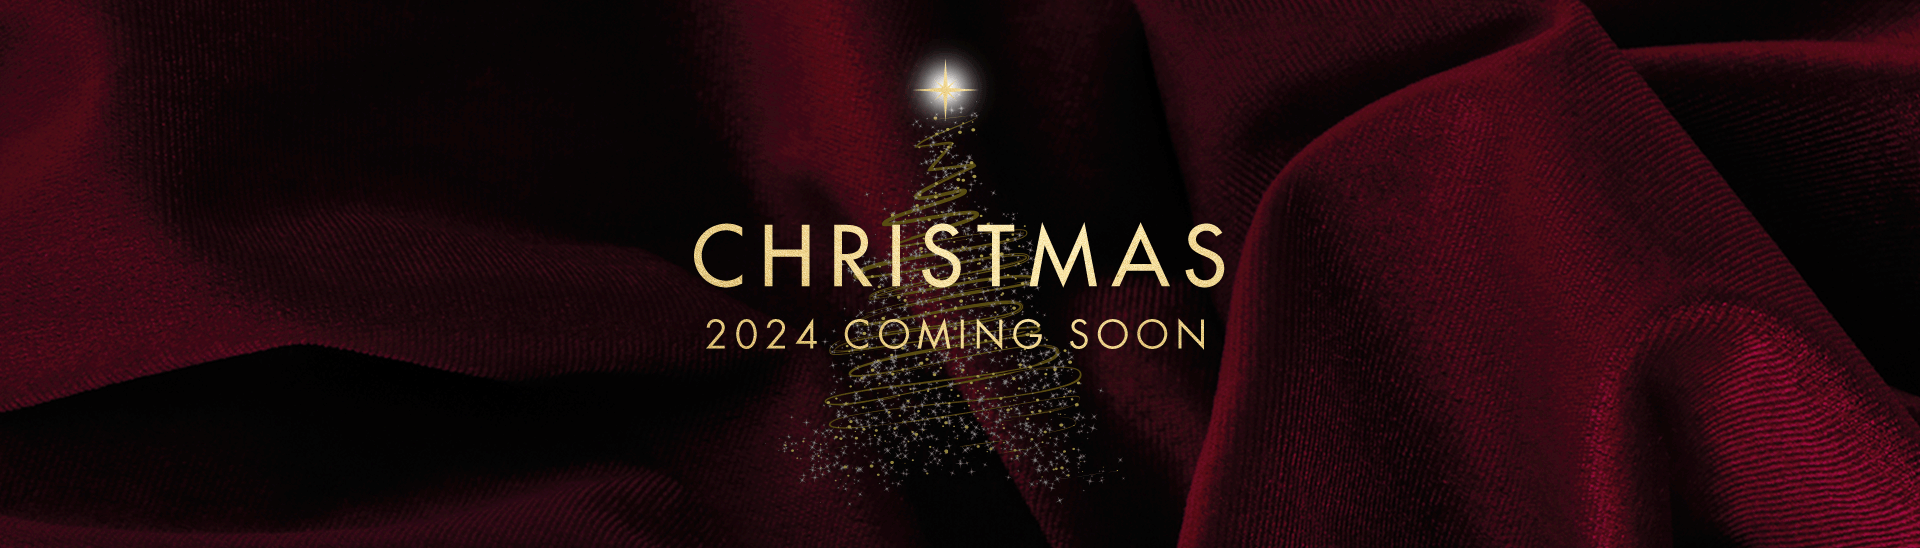 Christmas 2024 at Chelmsford